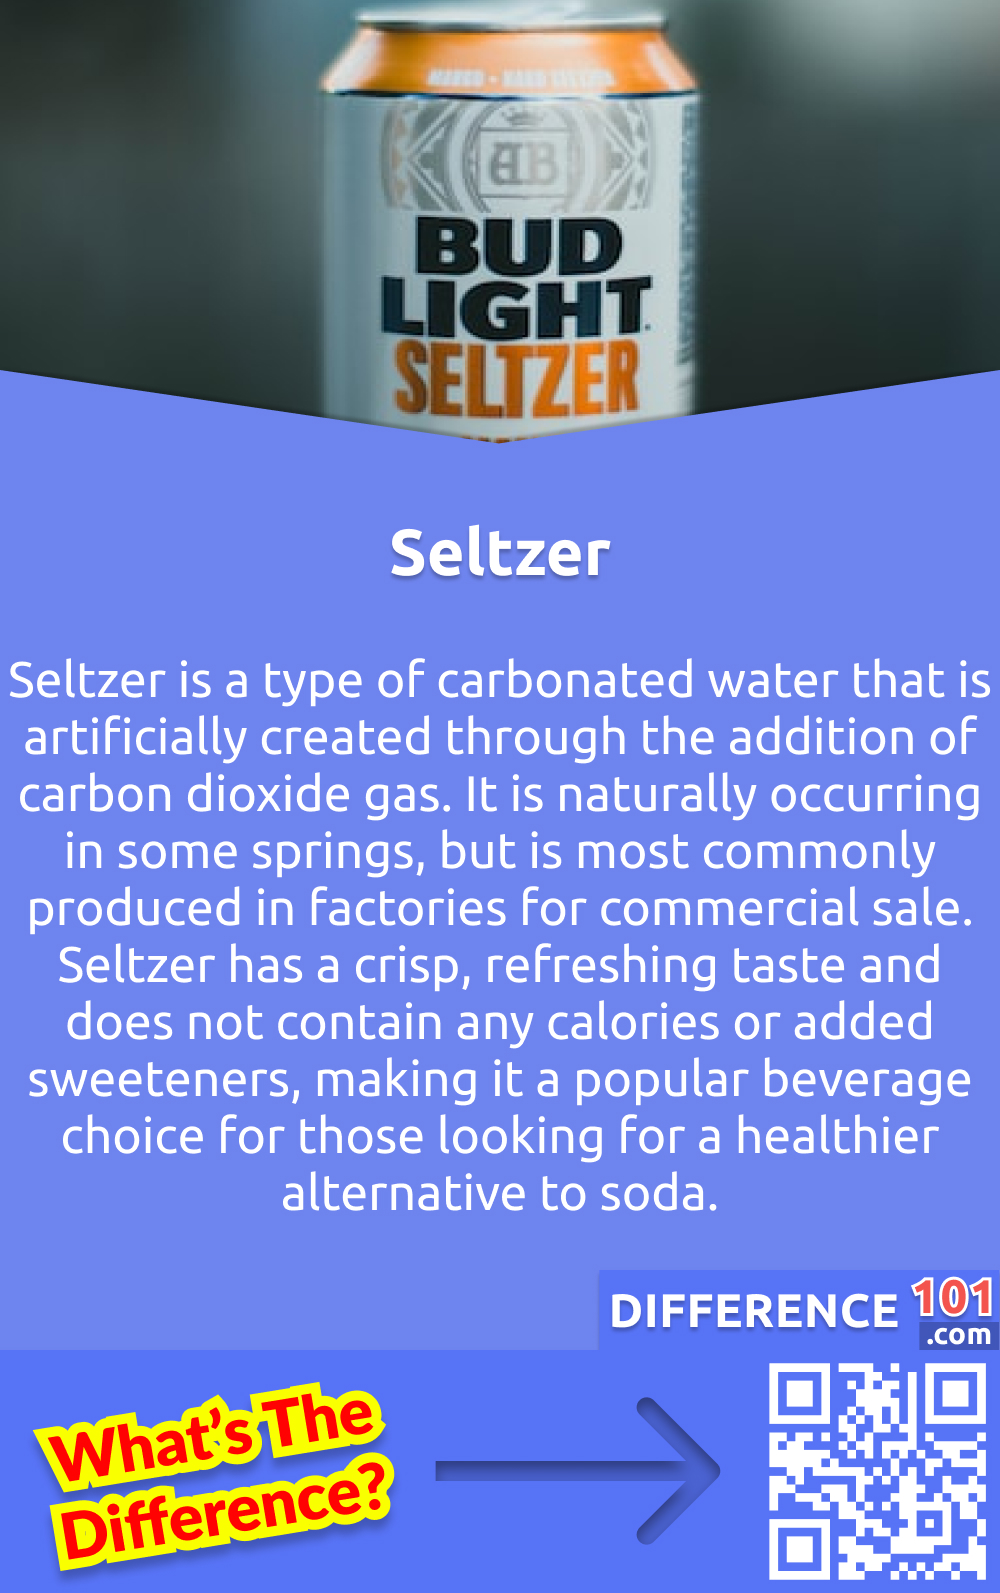 What Is Seltzer? Seltzer is a type of carbonated water that is artificially created through the addition of carbon dioxide gas. It is naturally occurring in some springs, but is most commonly produced in factories for commercial sale. Seltzer has a crisp, refreshing taste and does not contain any calories or added sweeteners, making it a popular beverage choice for those looking for a healthier alternative to soda. It has also been used as a home remedy for stomach discomfort, providing relief from indigestion and bloating. Additionally, the carbonation of the seltzer can help to aid digestion and break down food. As such, it is a great choice for those looking to improve their digestive health.
